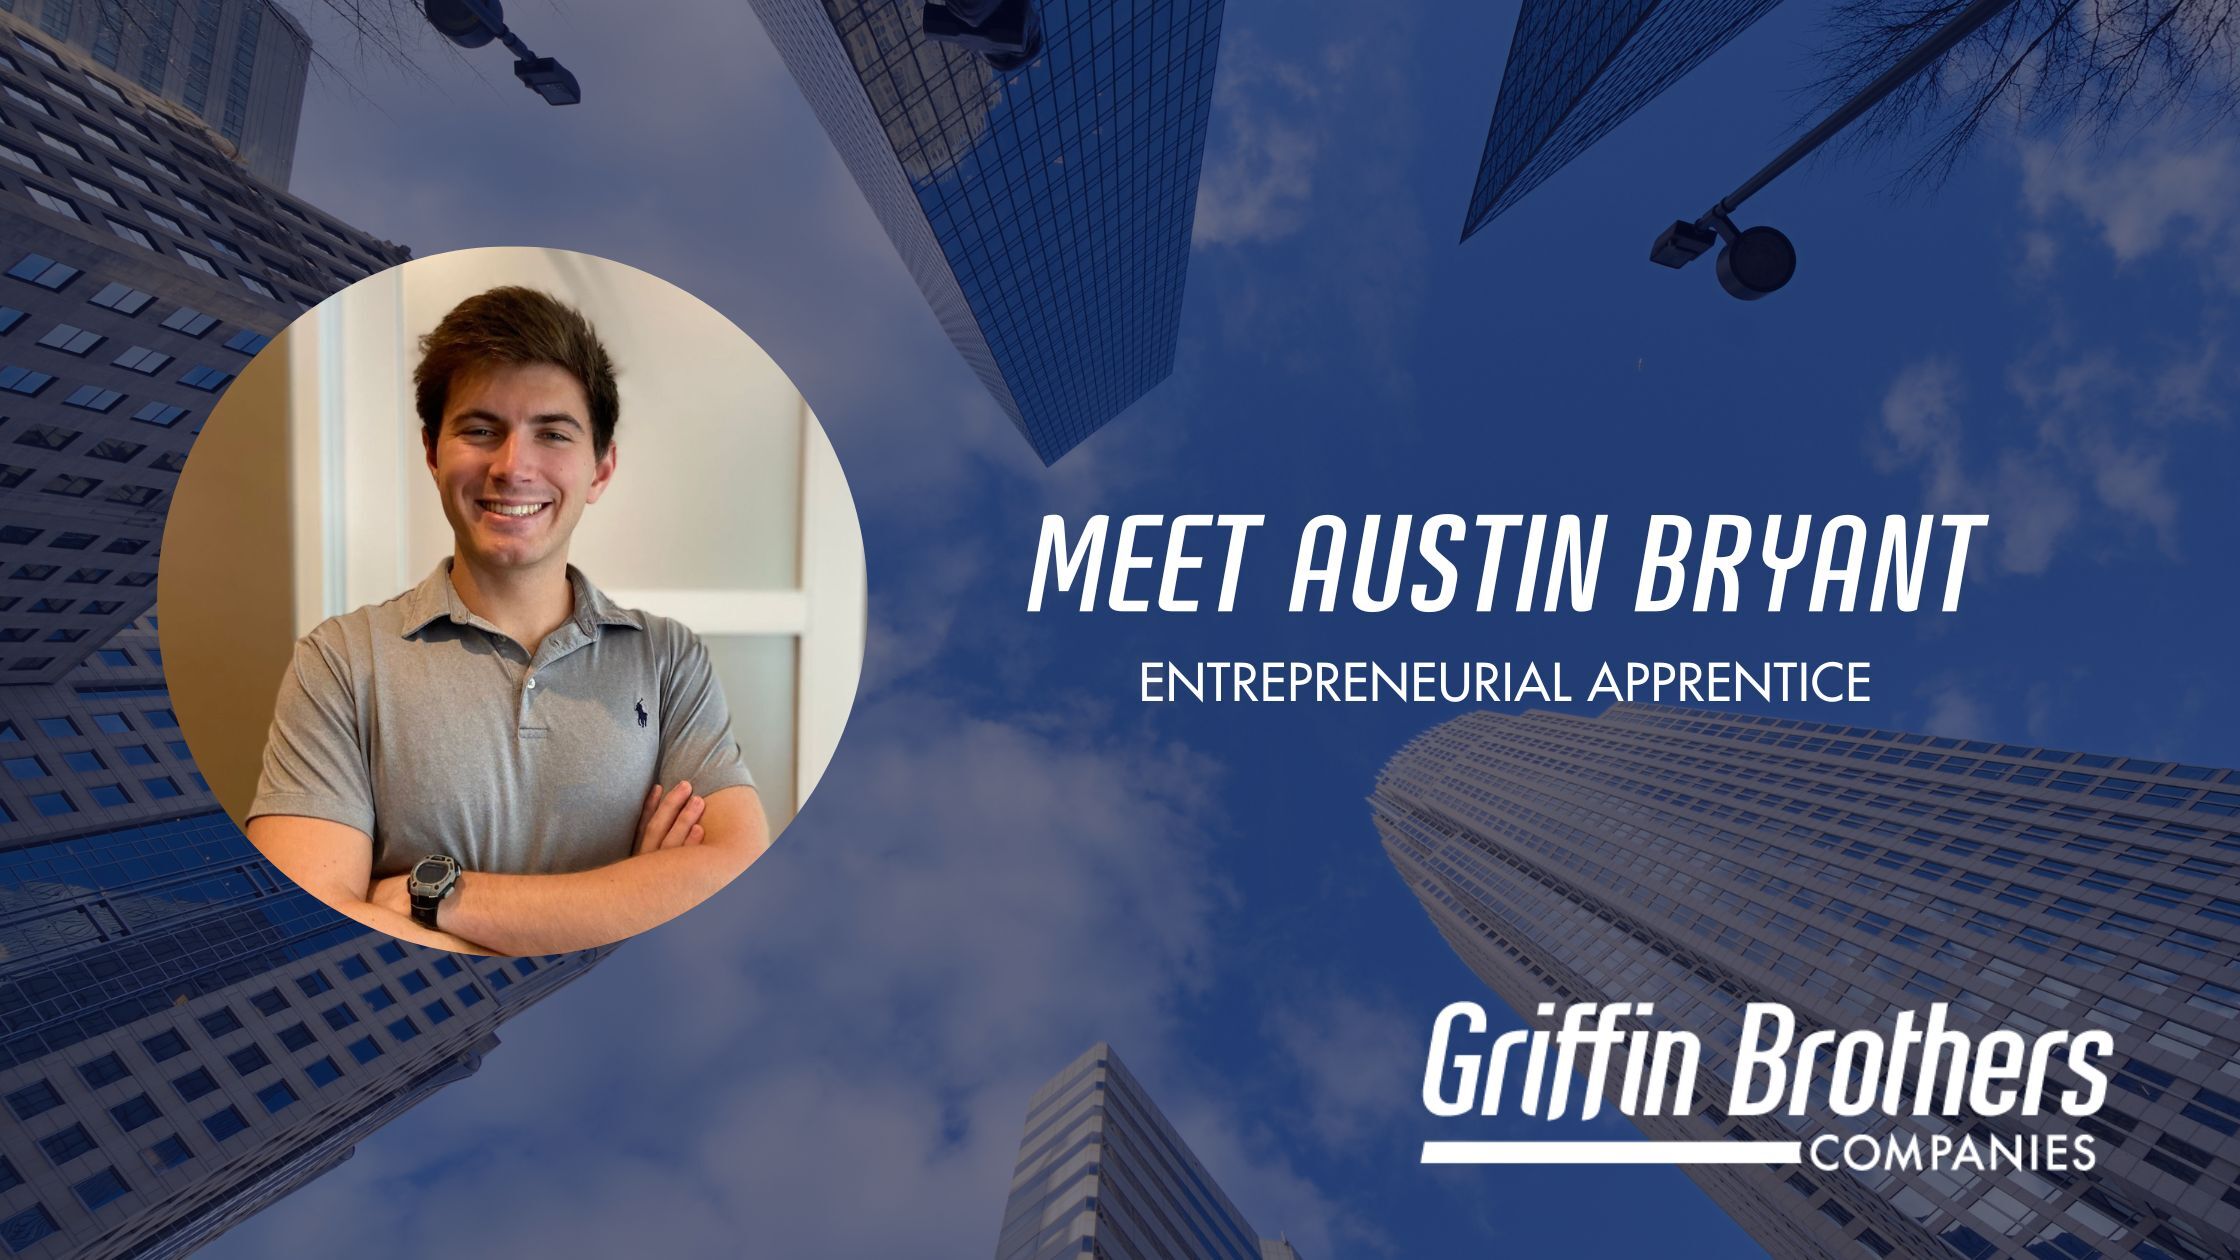 Meet Austin Bryant, entrepreneurial apprentice at Griffin Brothers Companies